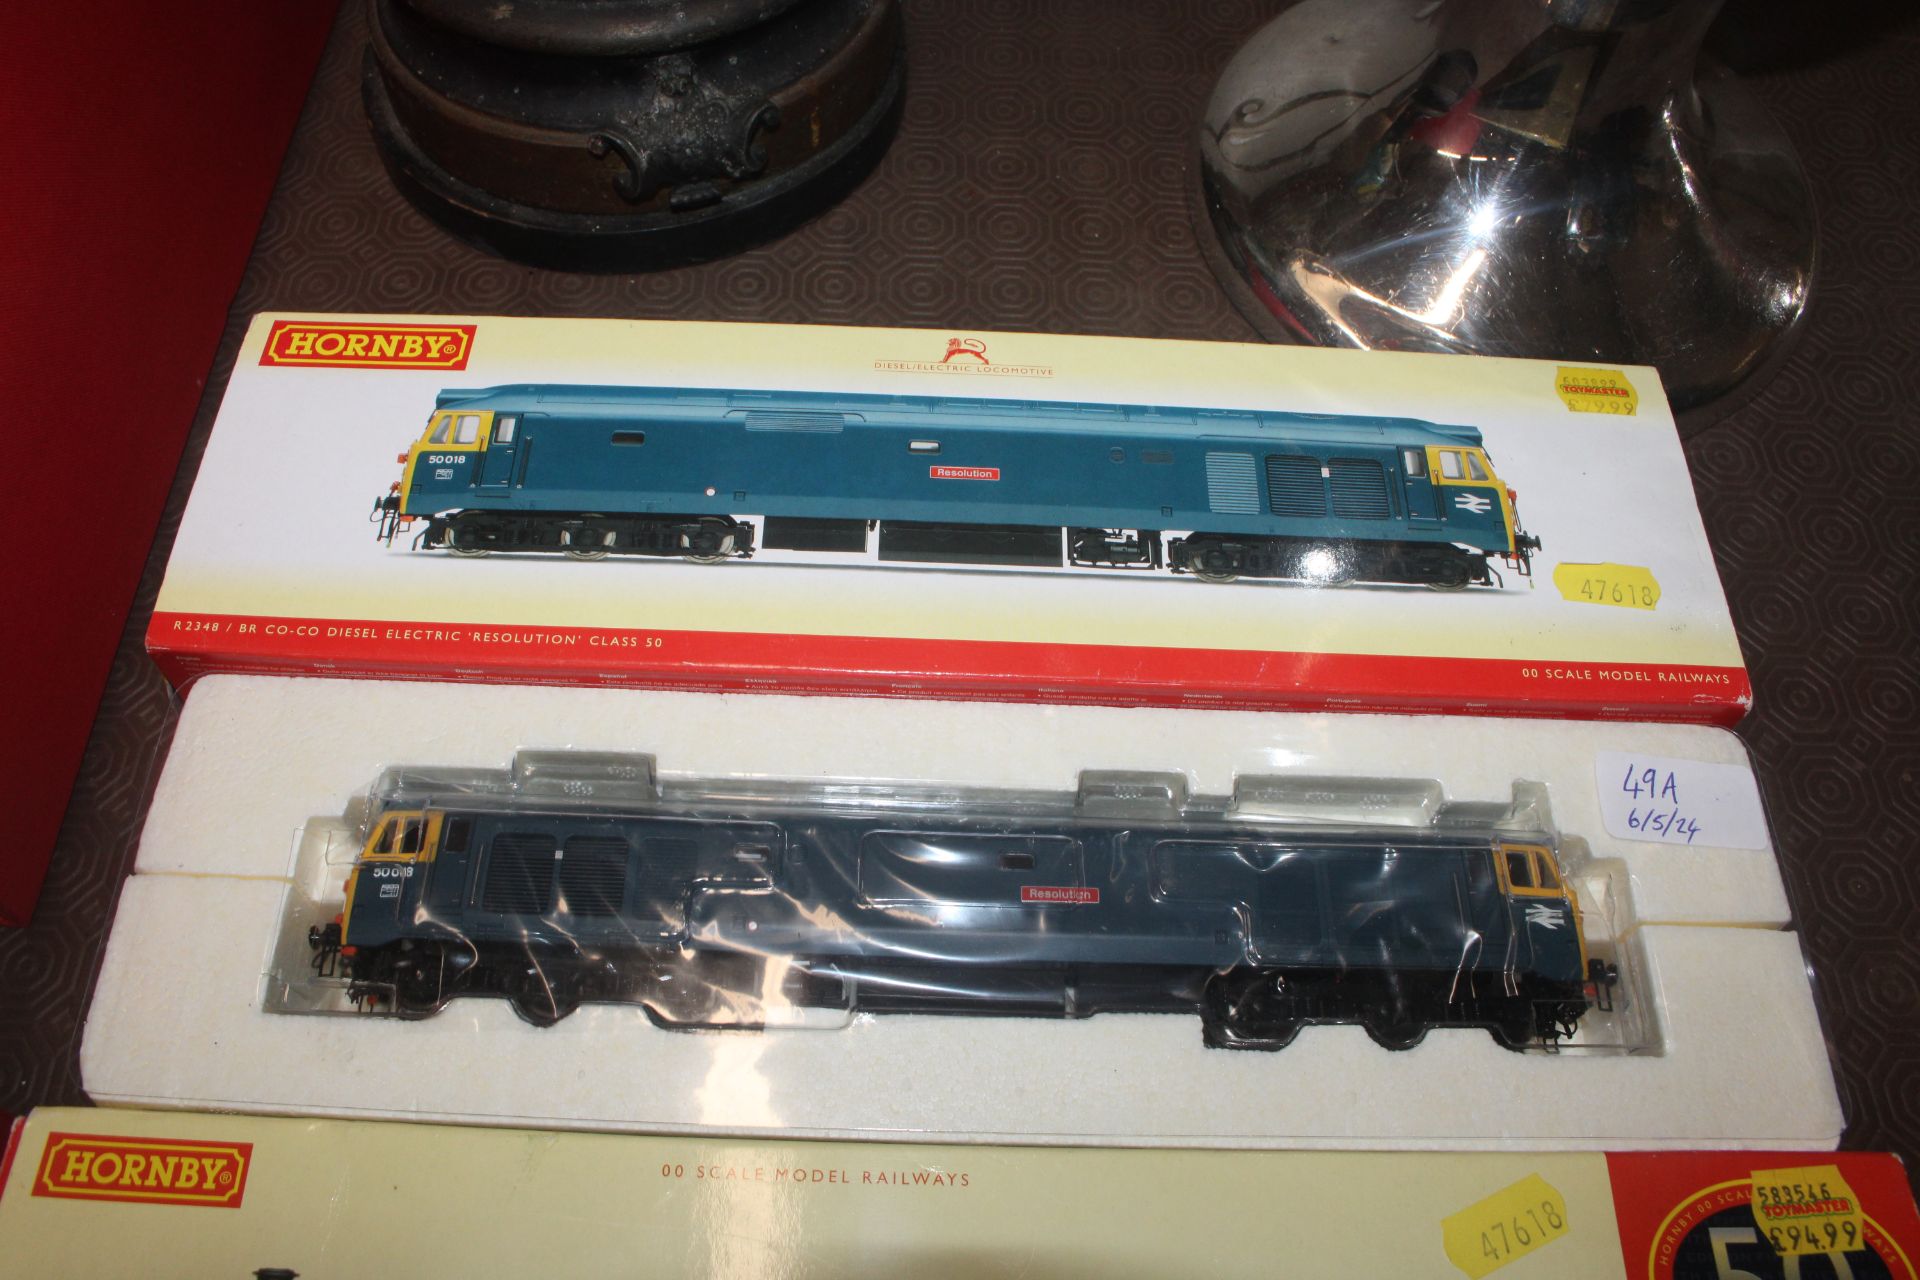 A Hornby OO scale model R2348/BR Co. Diesel Electric Resolution Class 50, with original box; and a - Image 2 of 8